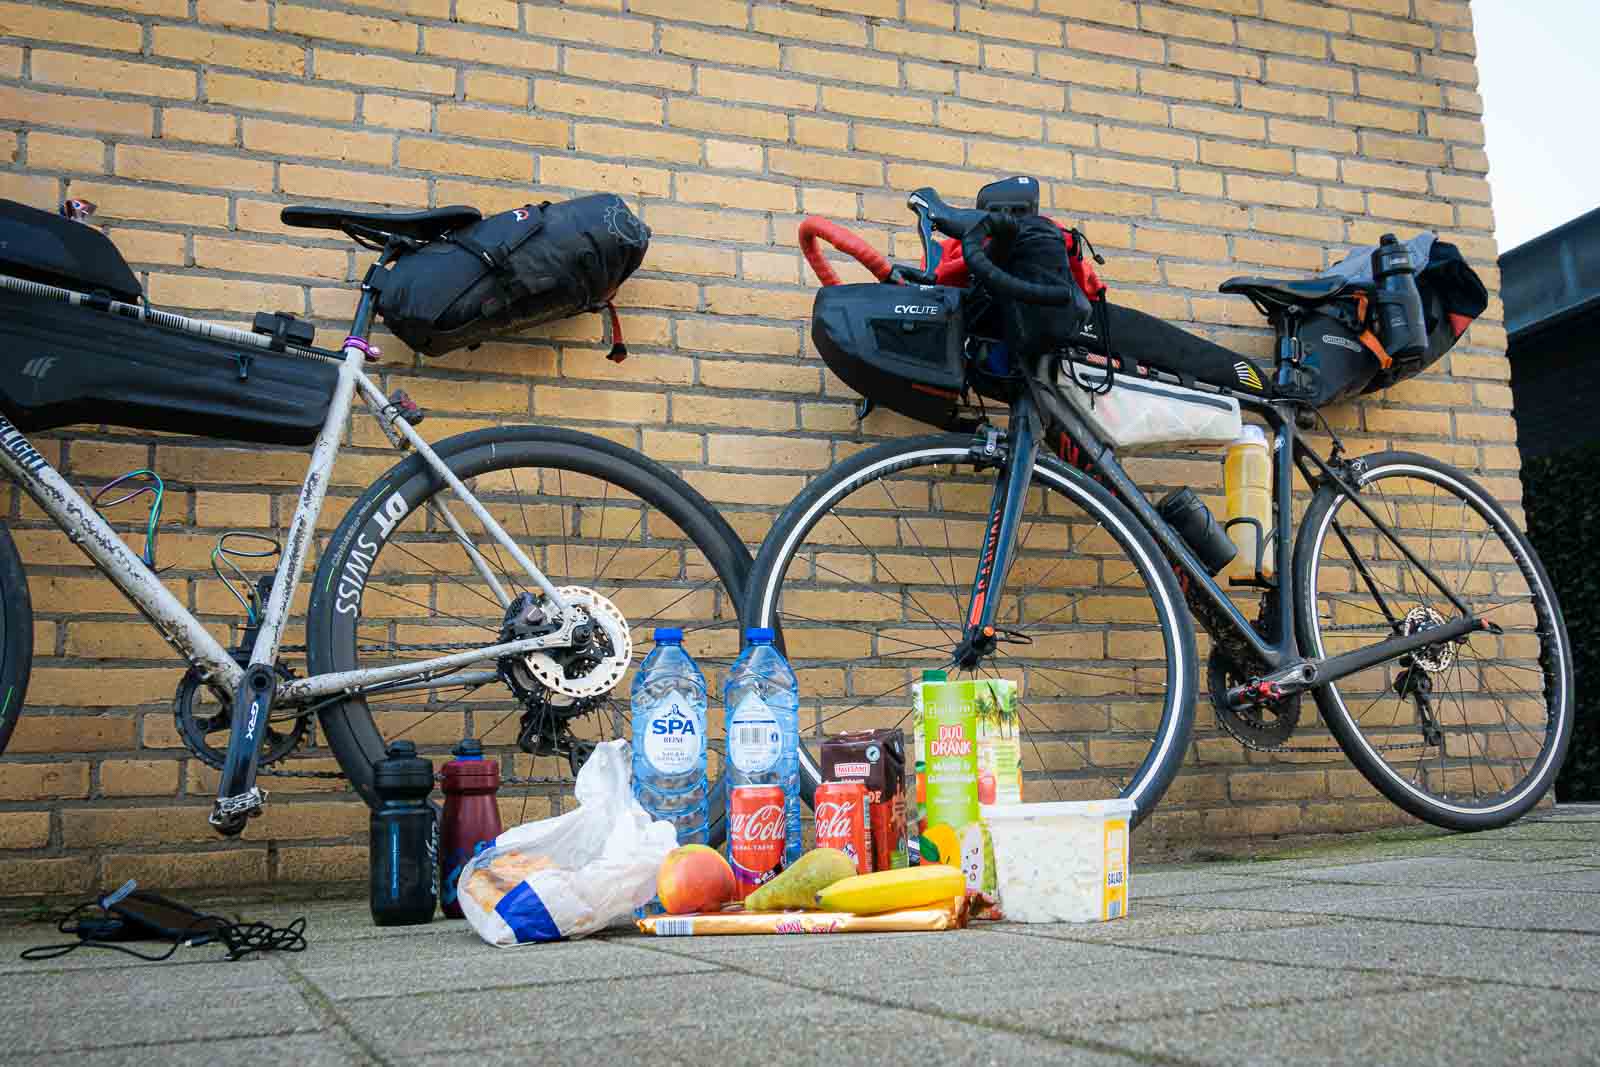 On the ground are provisions from two participants in the Race around the Netherlands, including water, cocoa, potato salad and cola